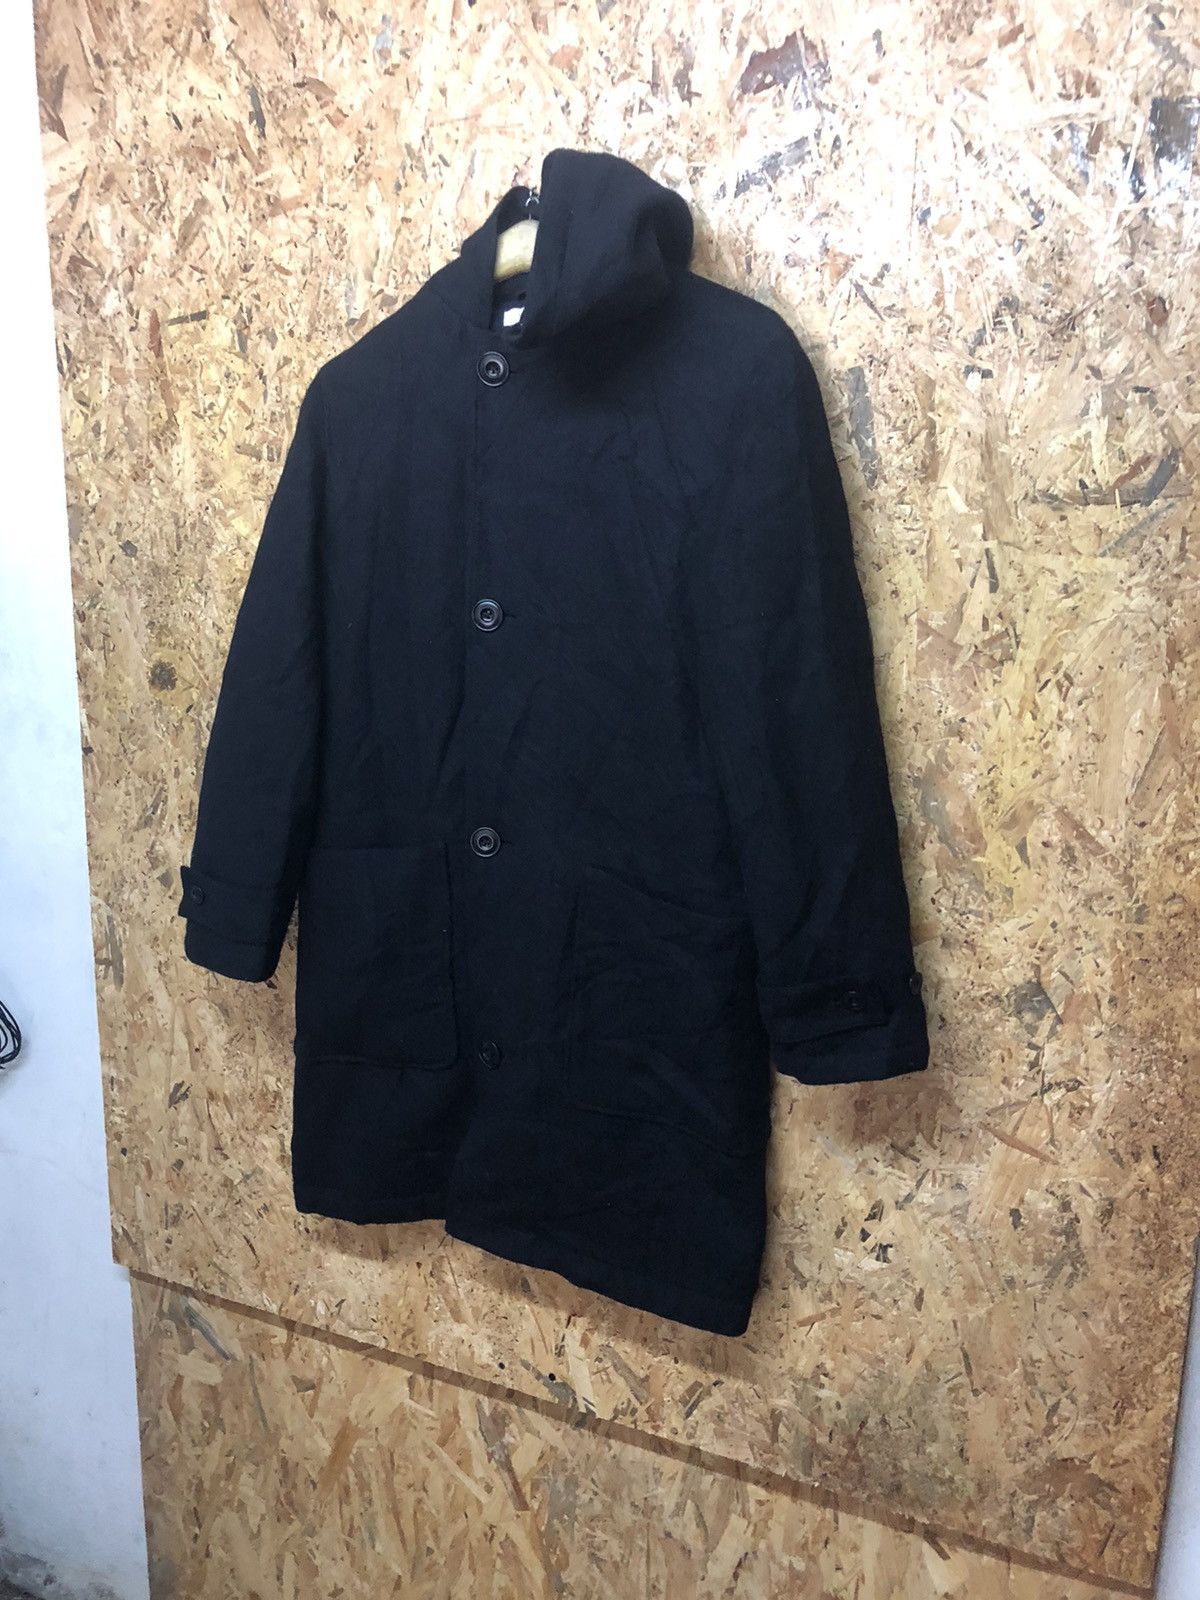 Uniqlo UNIQLO AND LEMAIRE HOODIE JACKET Size US M / EU 48-50 / 2 - 2 Preview